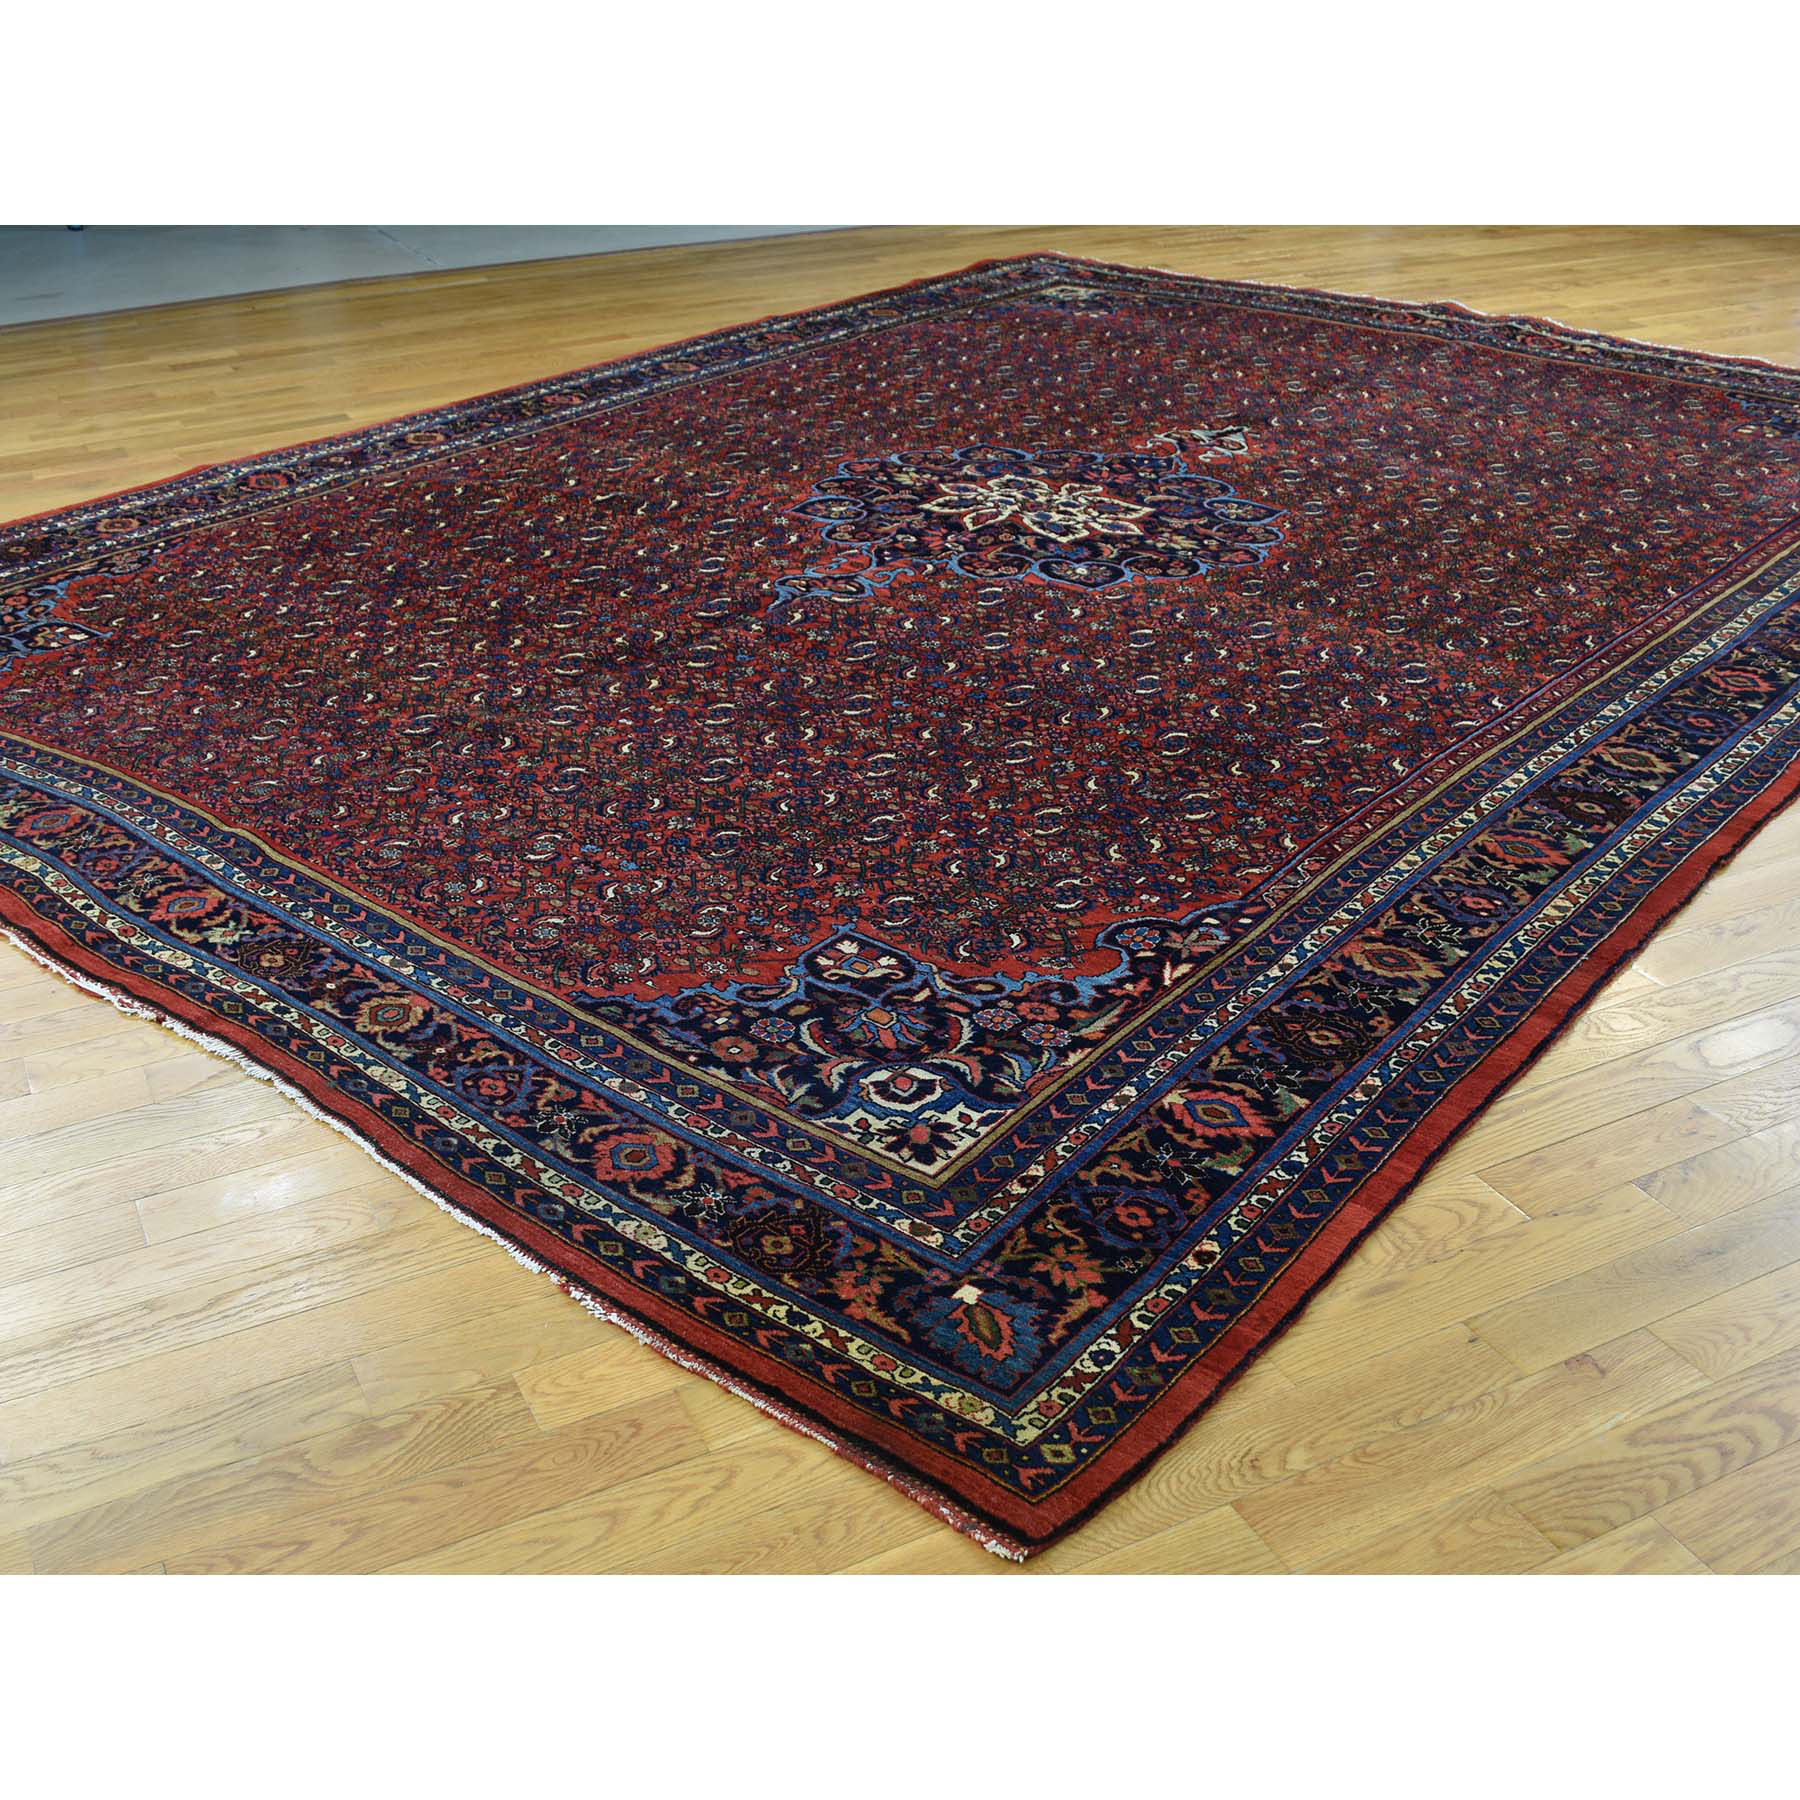 10-5 x13-9  Antique Persian Bijar Exc Cond Hand-Knotted Oriental Rug 